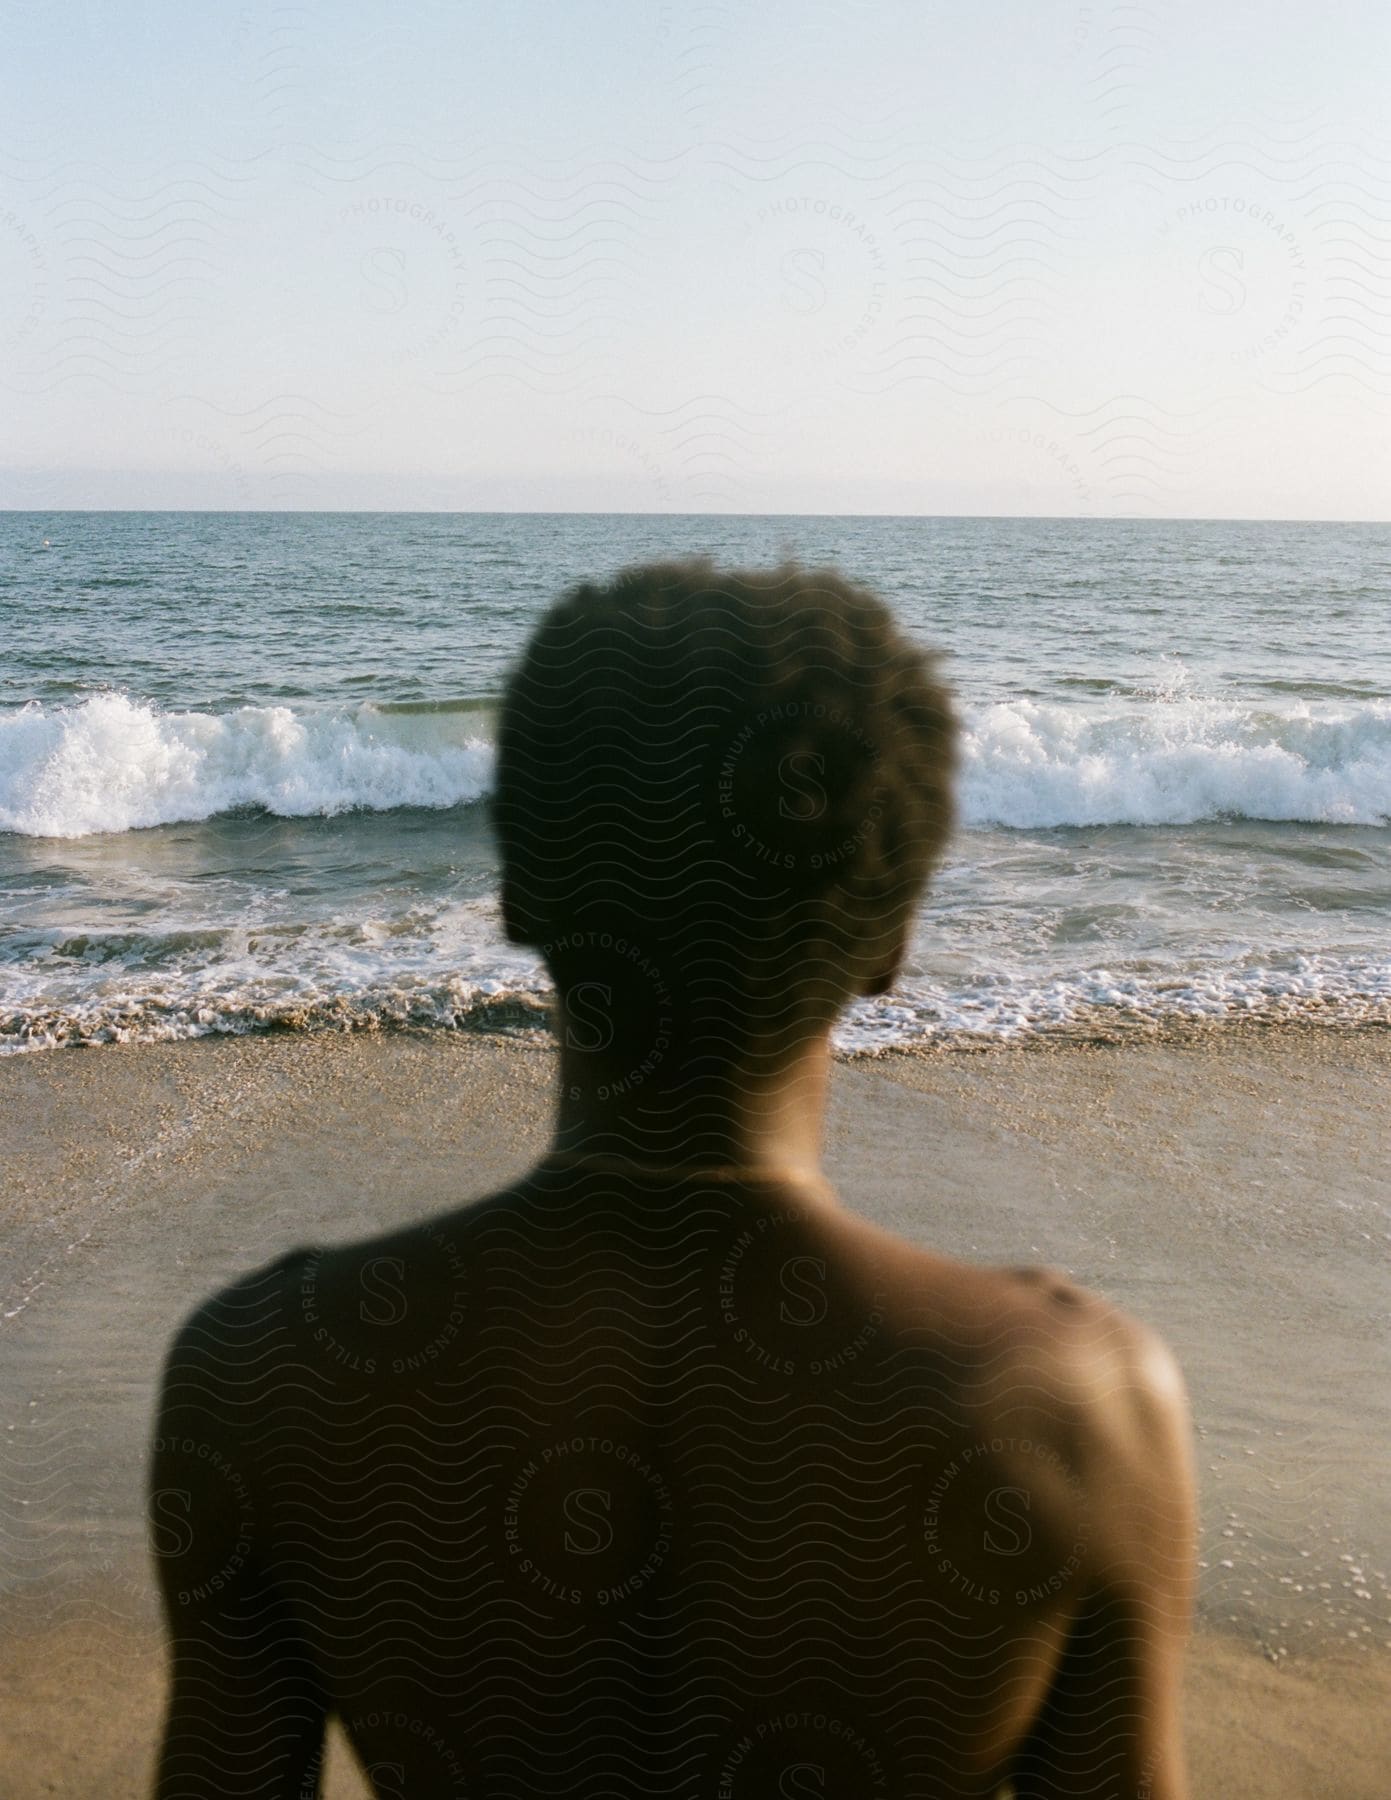 Shirtless young black man standing near the shoreline watching the ocean